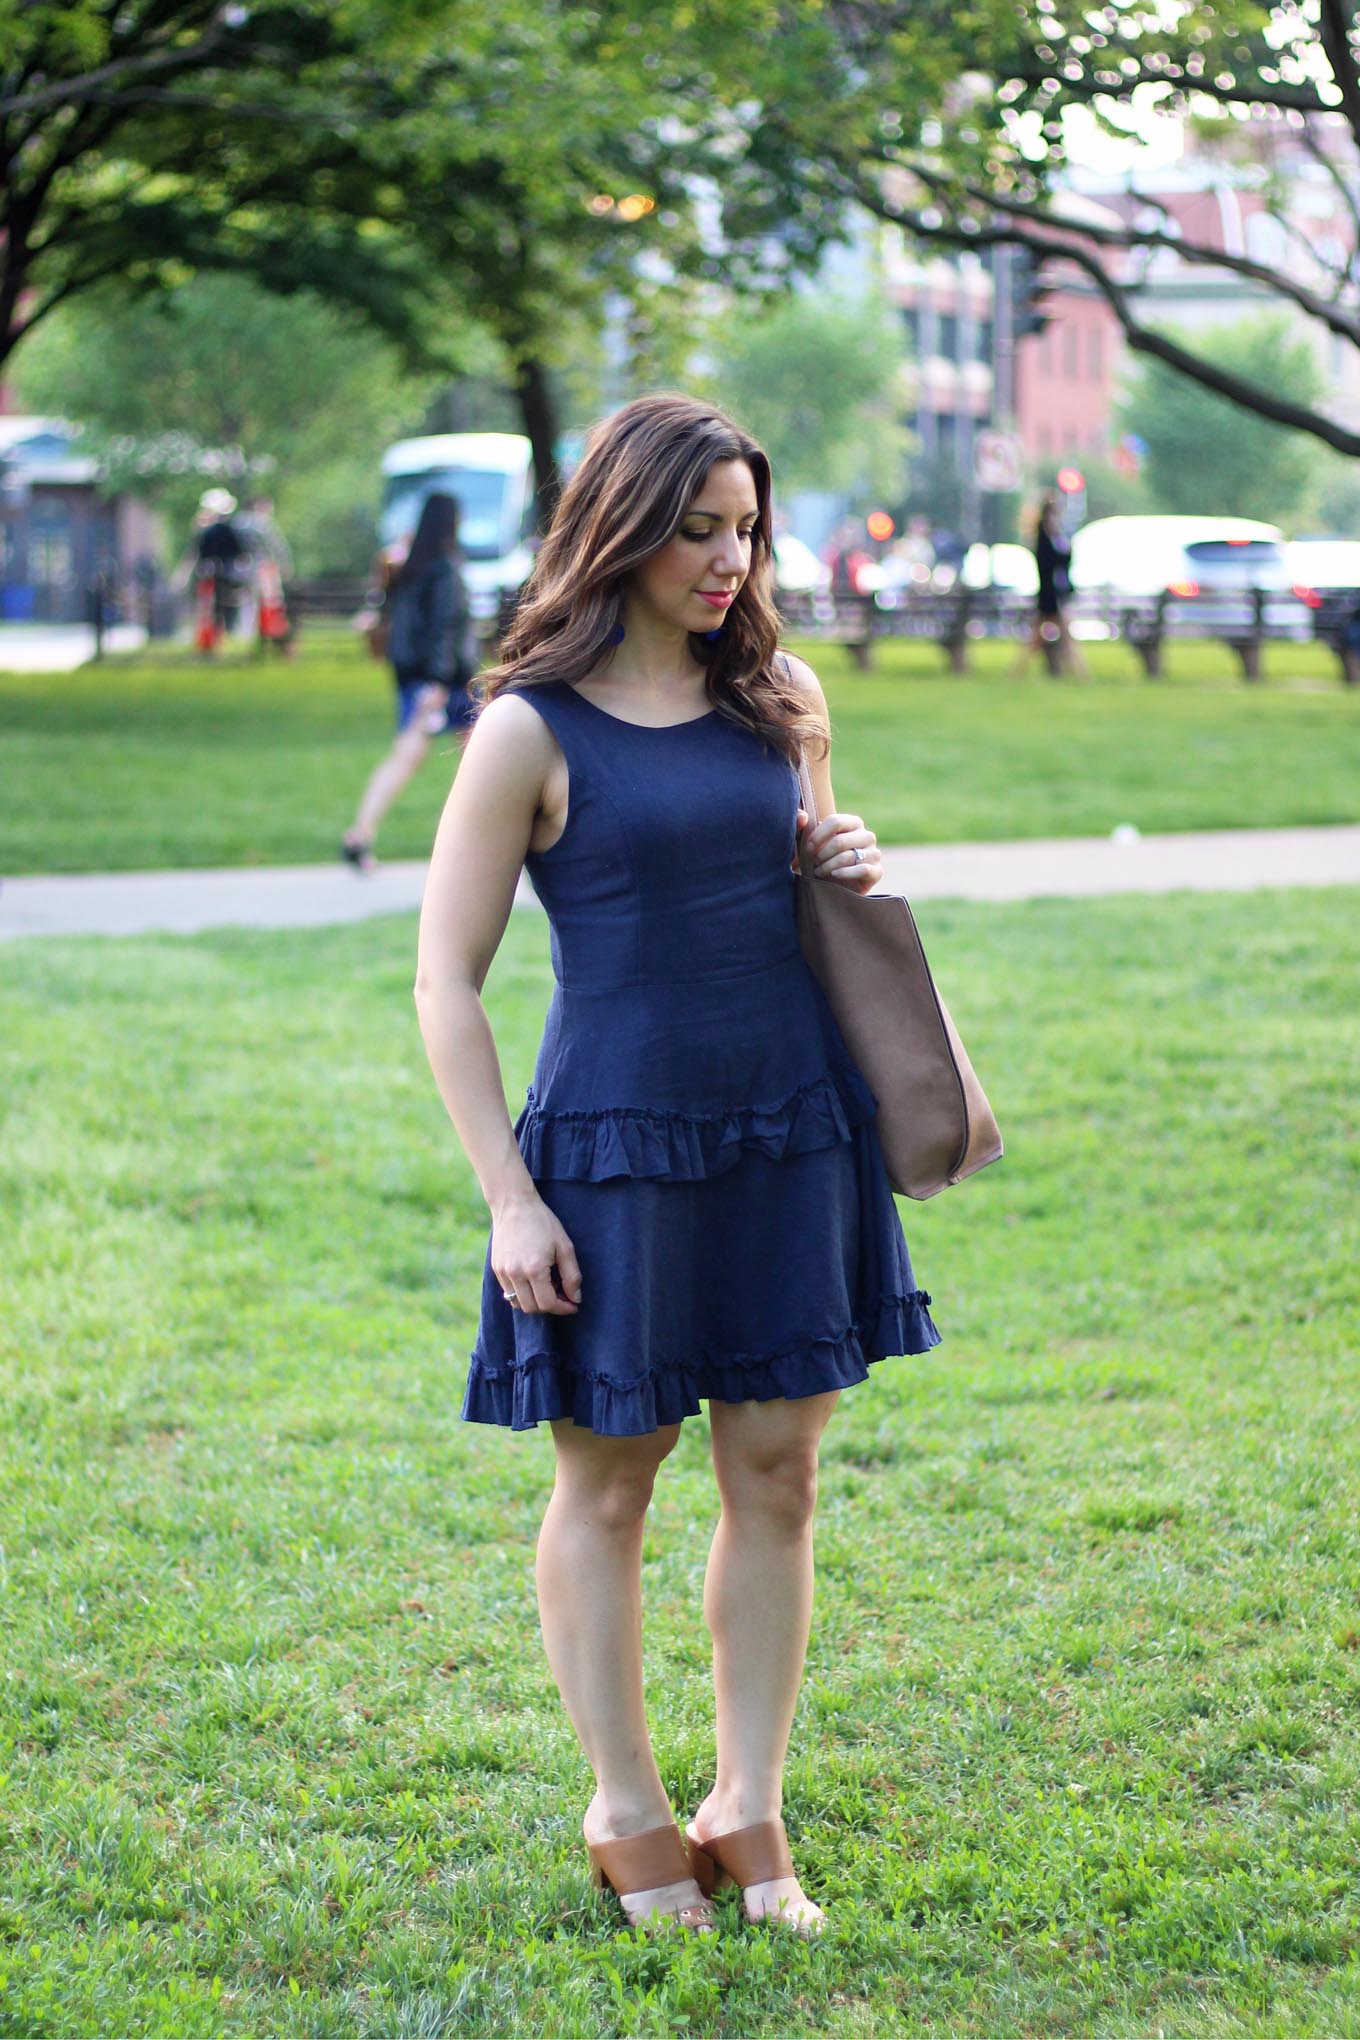 Lifestyle blogger Roxanne of Glass of Glam wearing a blue linen Francesca's dress, M.Gemi heels, Baublebar crispin drops, and a justfab bag